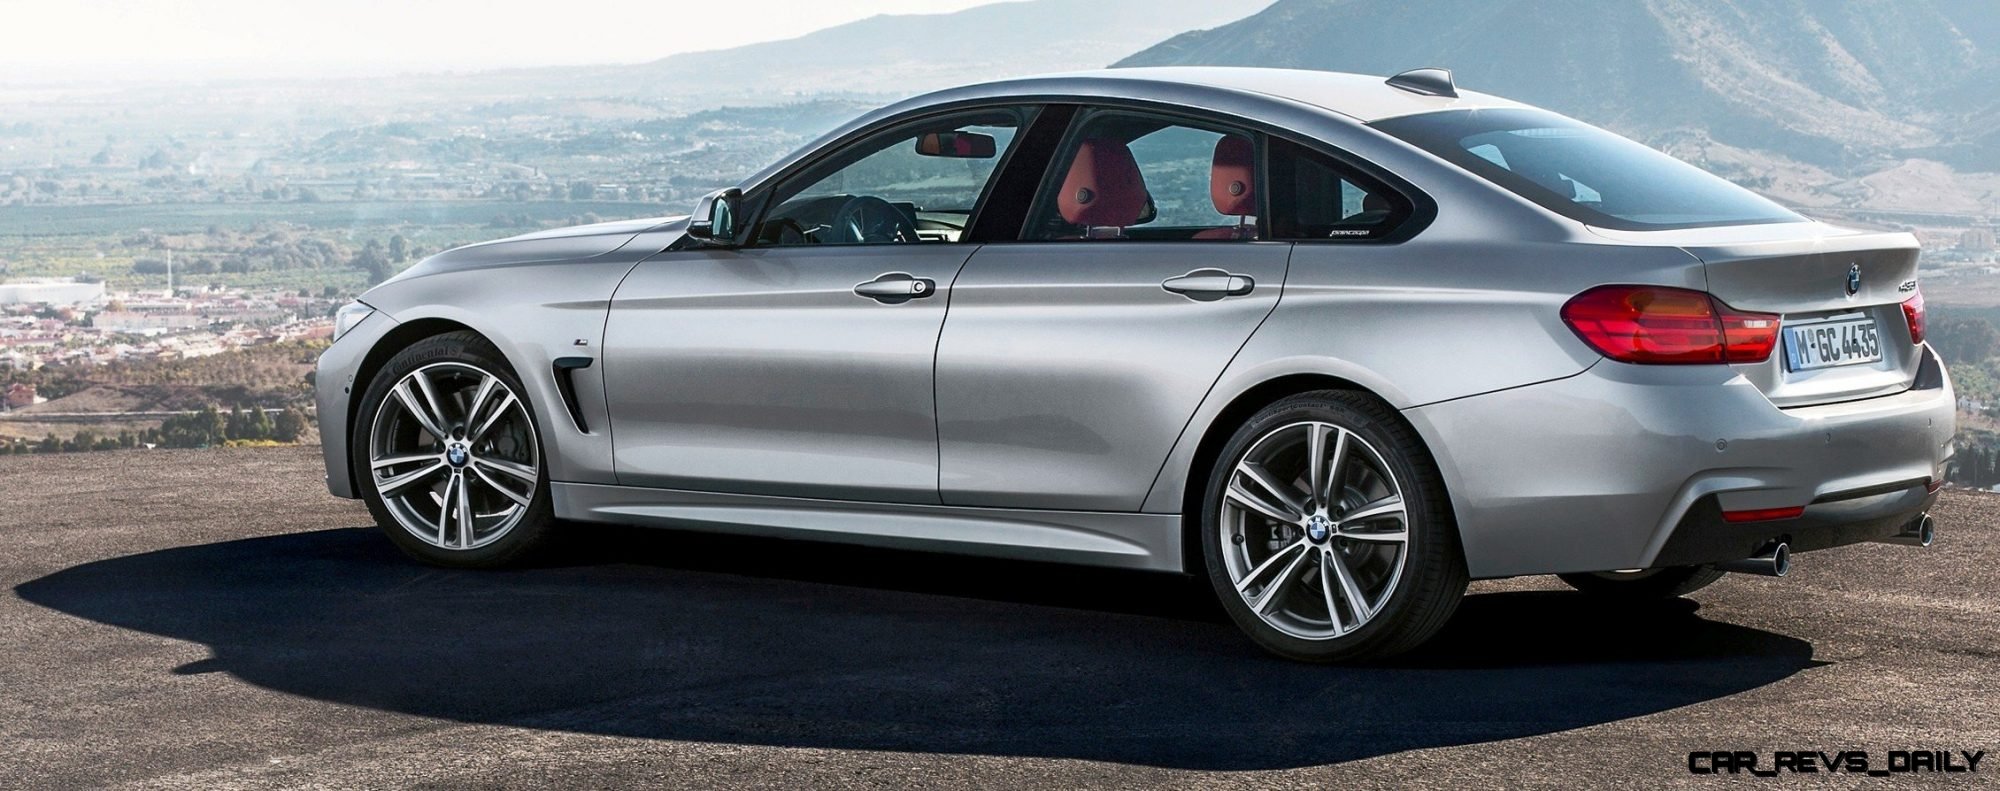 2015 BMW 428i and 435i Gran Coupes Bring Wide, Low Style + xDrive, 4 Doors  and Huge Trunks - Arriving Summer 2014 From $43,000 » Car-Revs-Daily.com